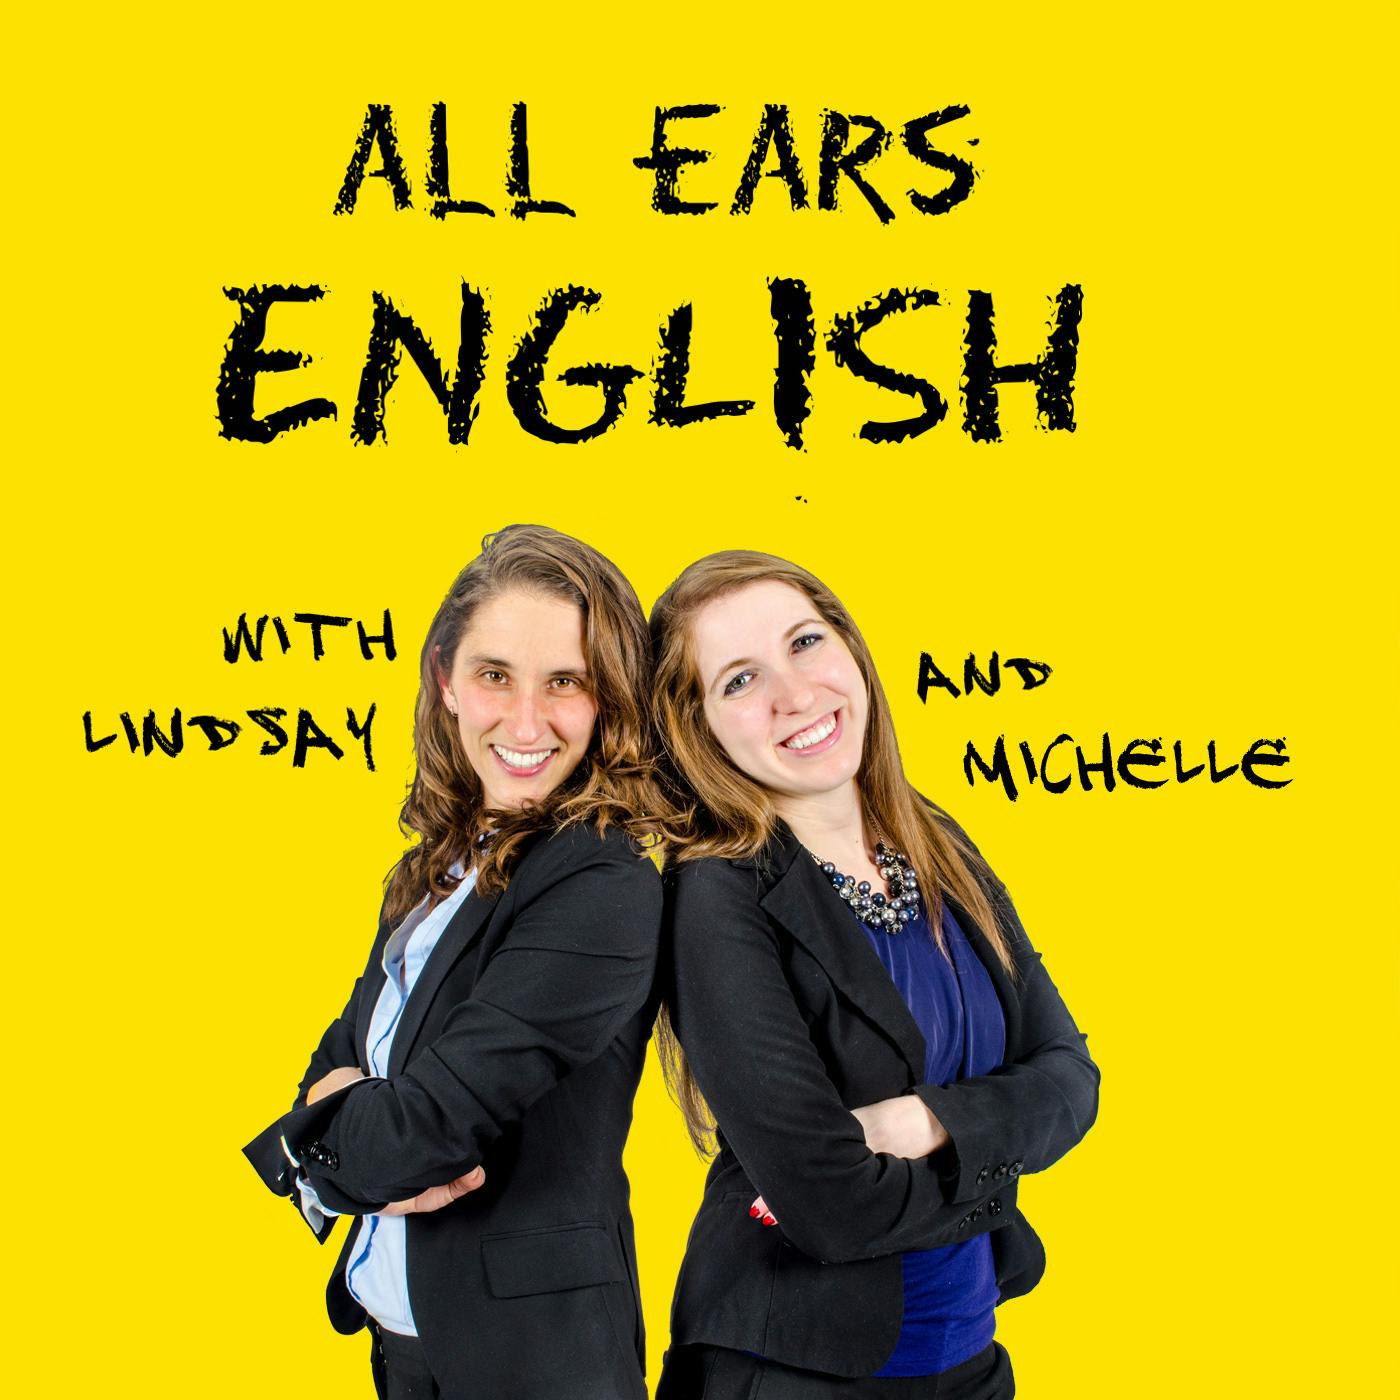 AEE 1417: This is Real English, Though!